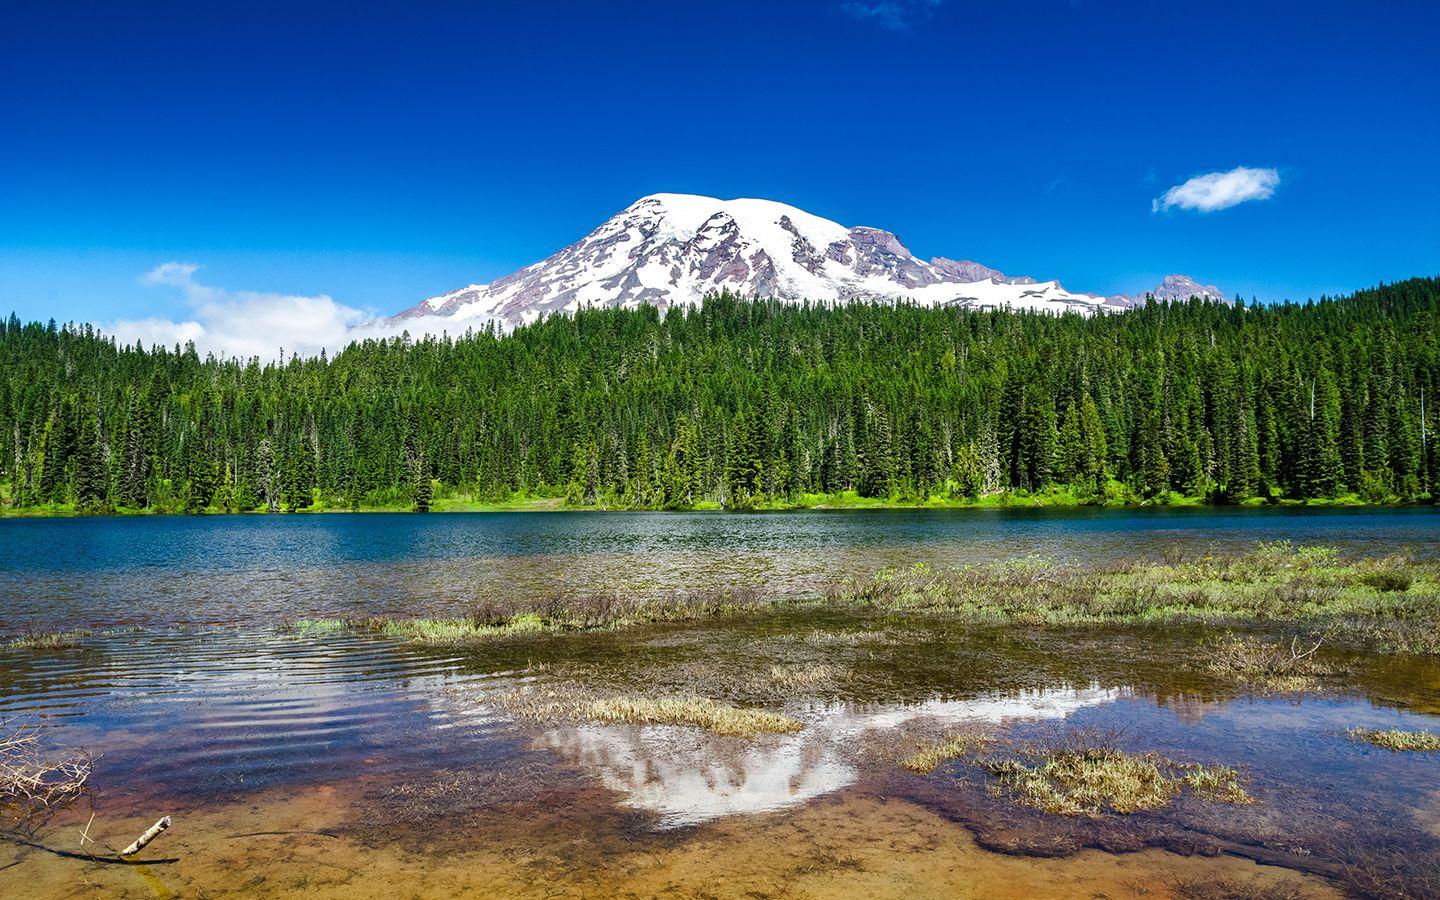 This amazing place is Mount Rainier National Park near Seattle